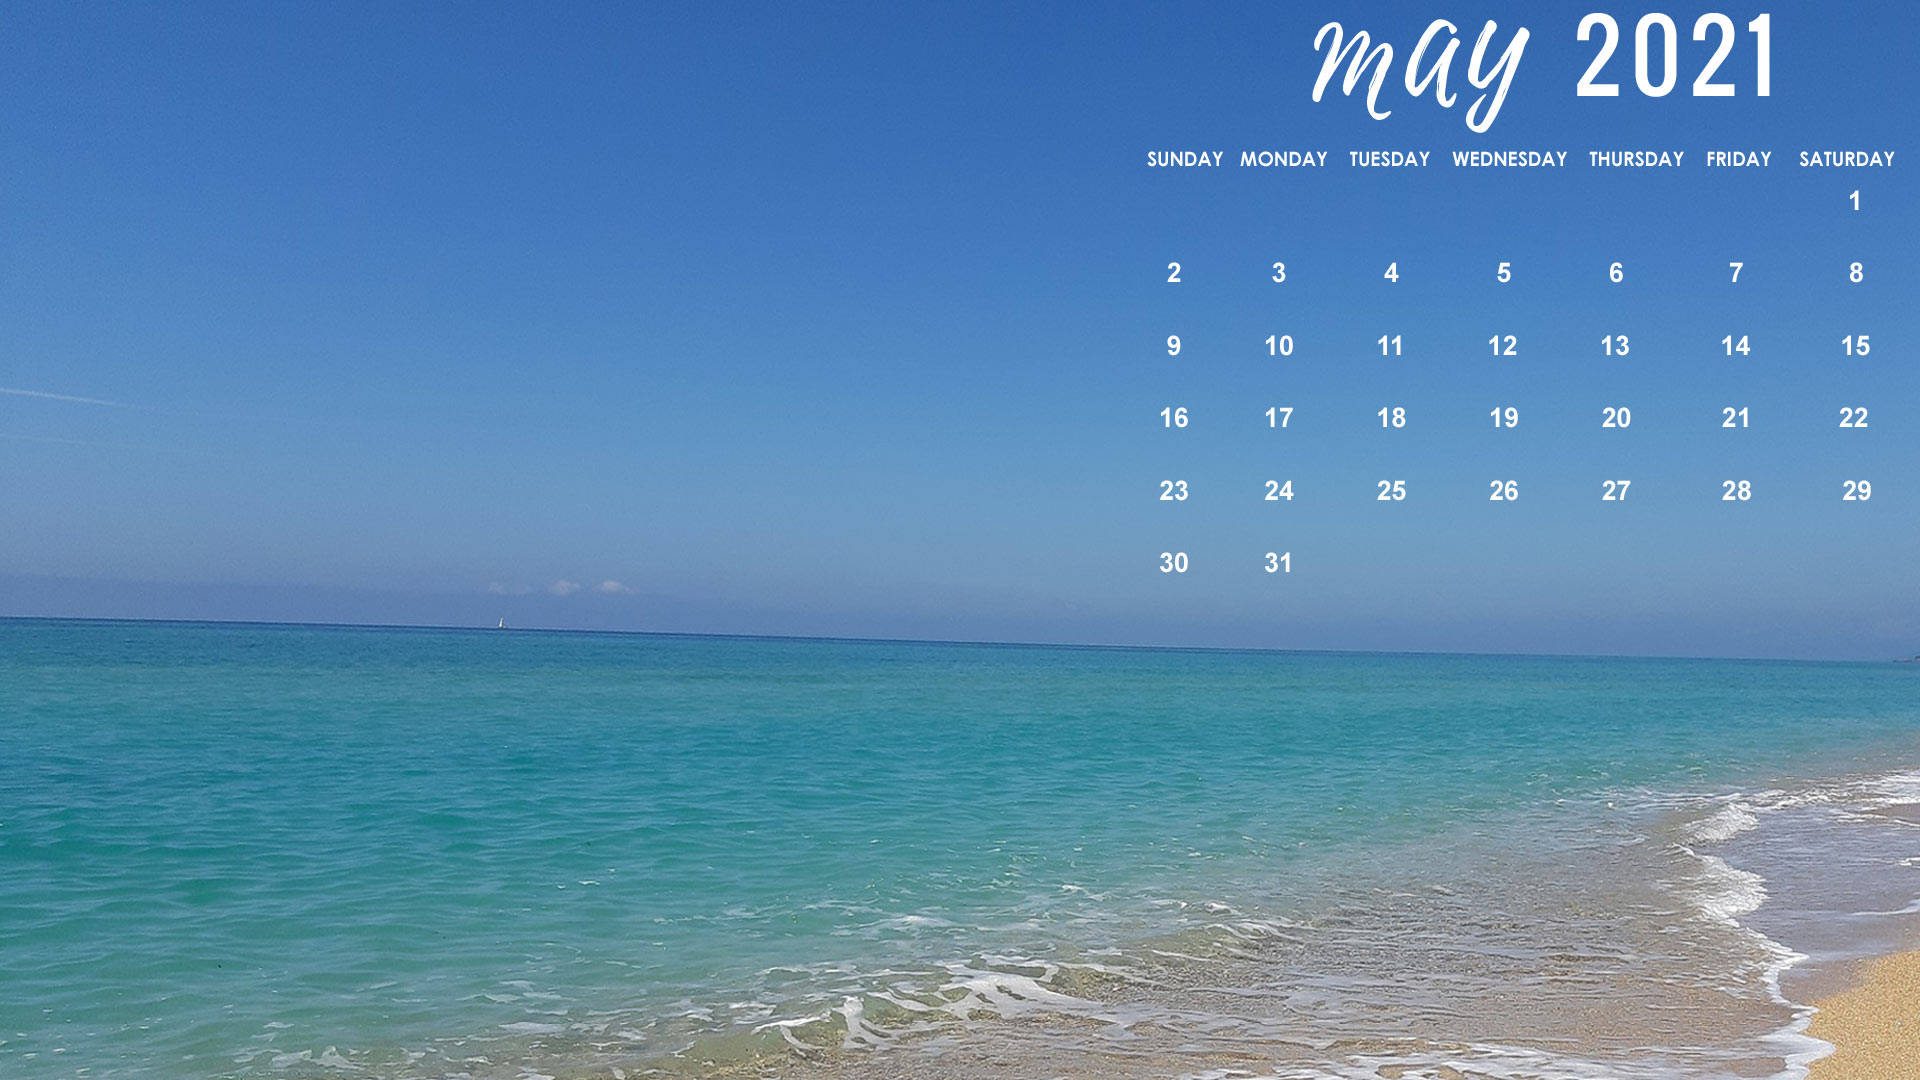 Enjoy the last days of May in a beautiful tropical beach. Wallpaper